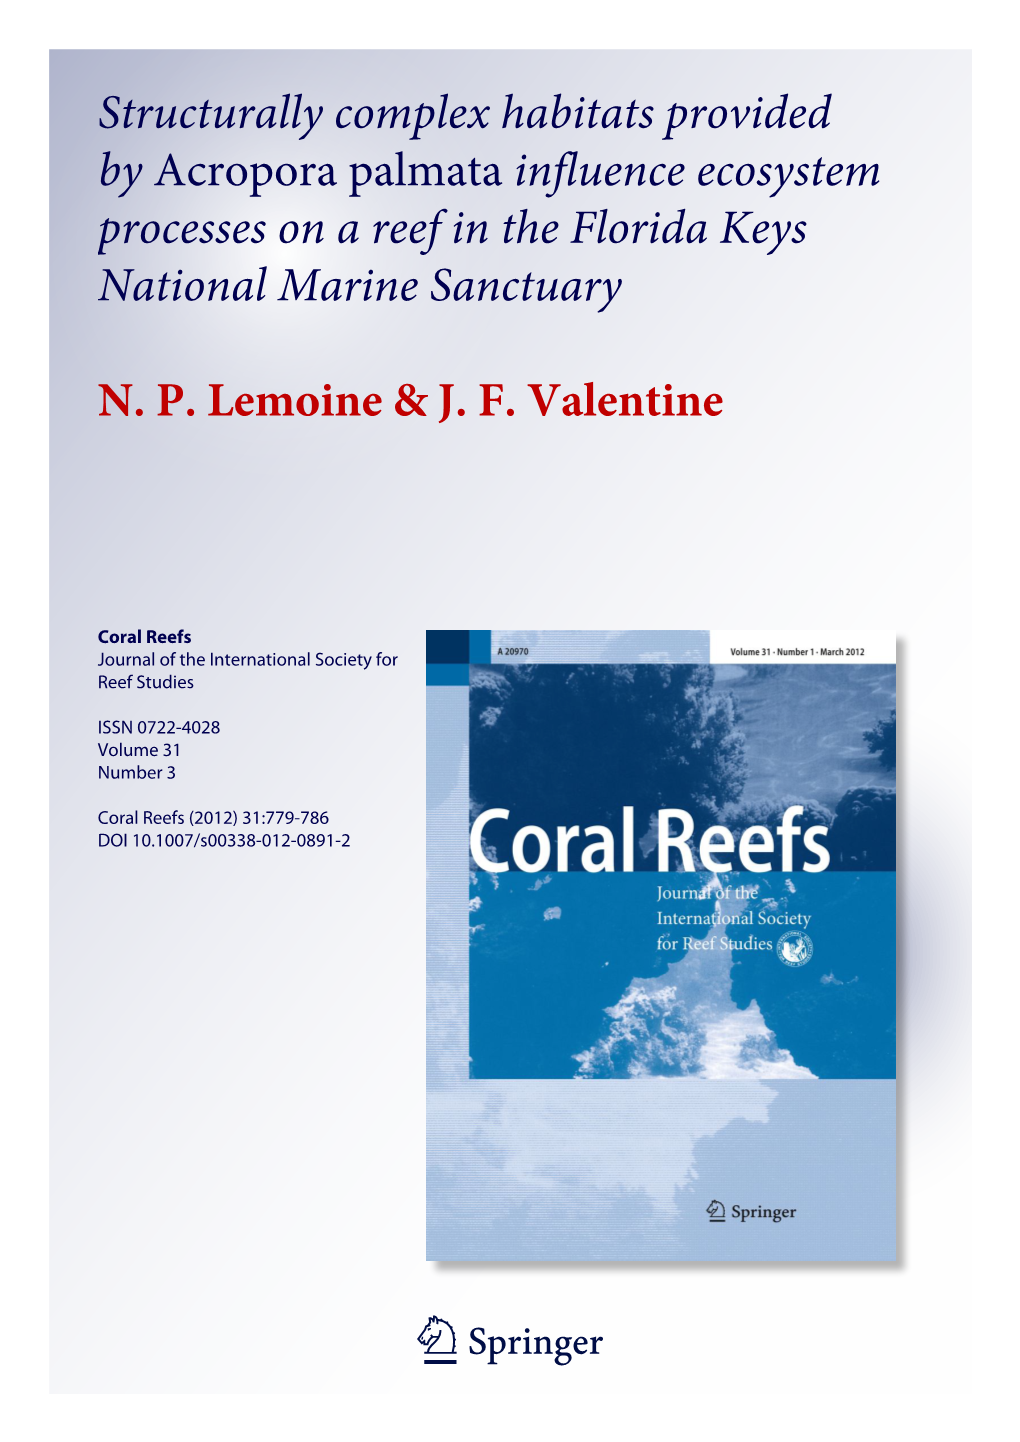 Coral Reefs Journal of the International Society for Reef Studies